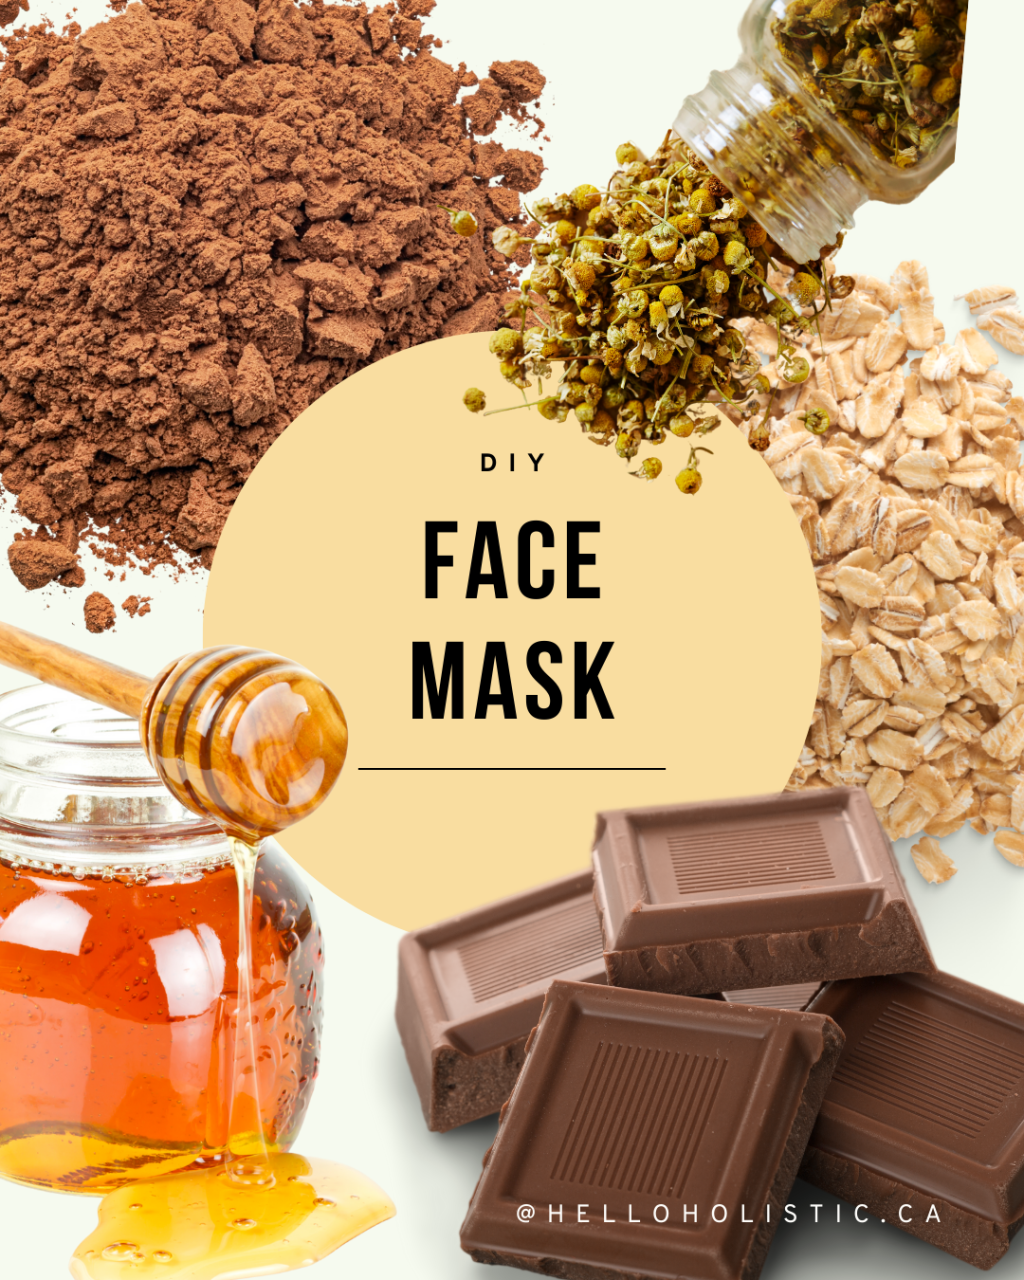 Make a DIY Soothing Face Mask Using Ingredients From Your Pantry